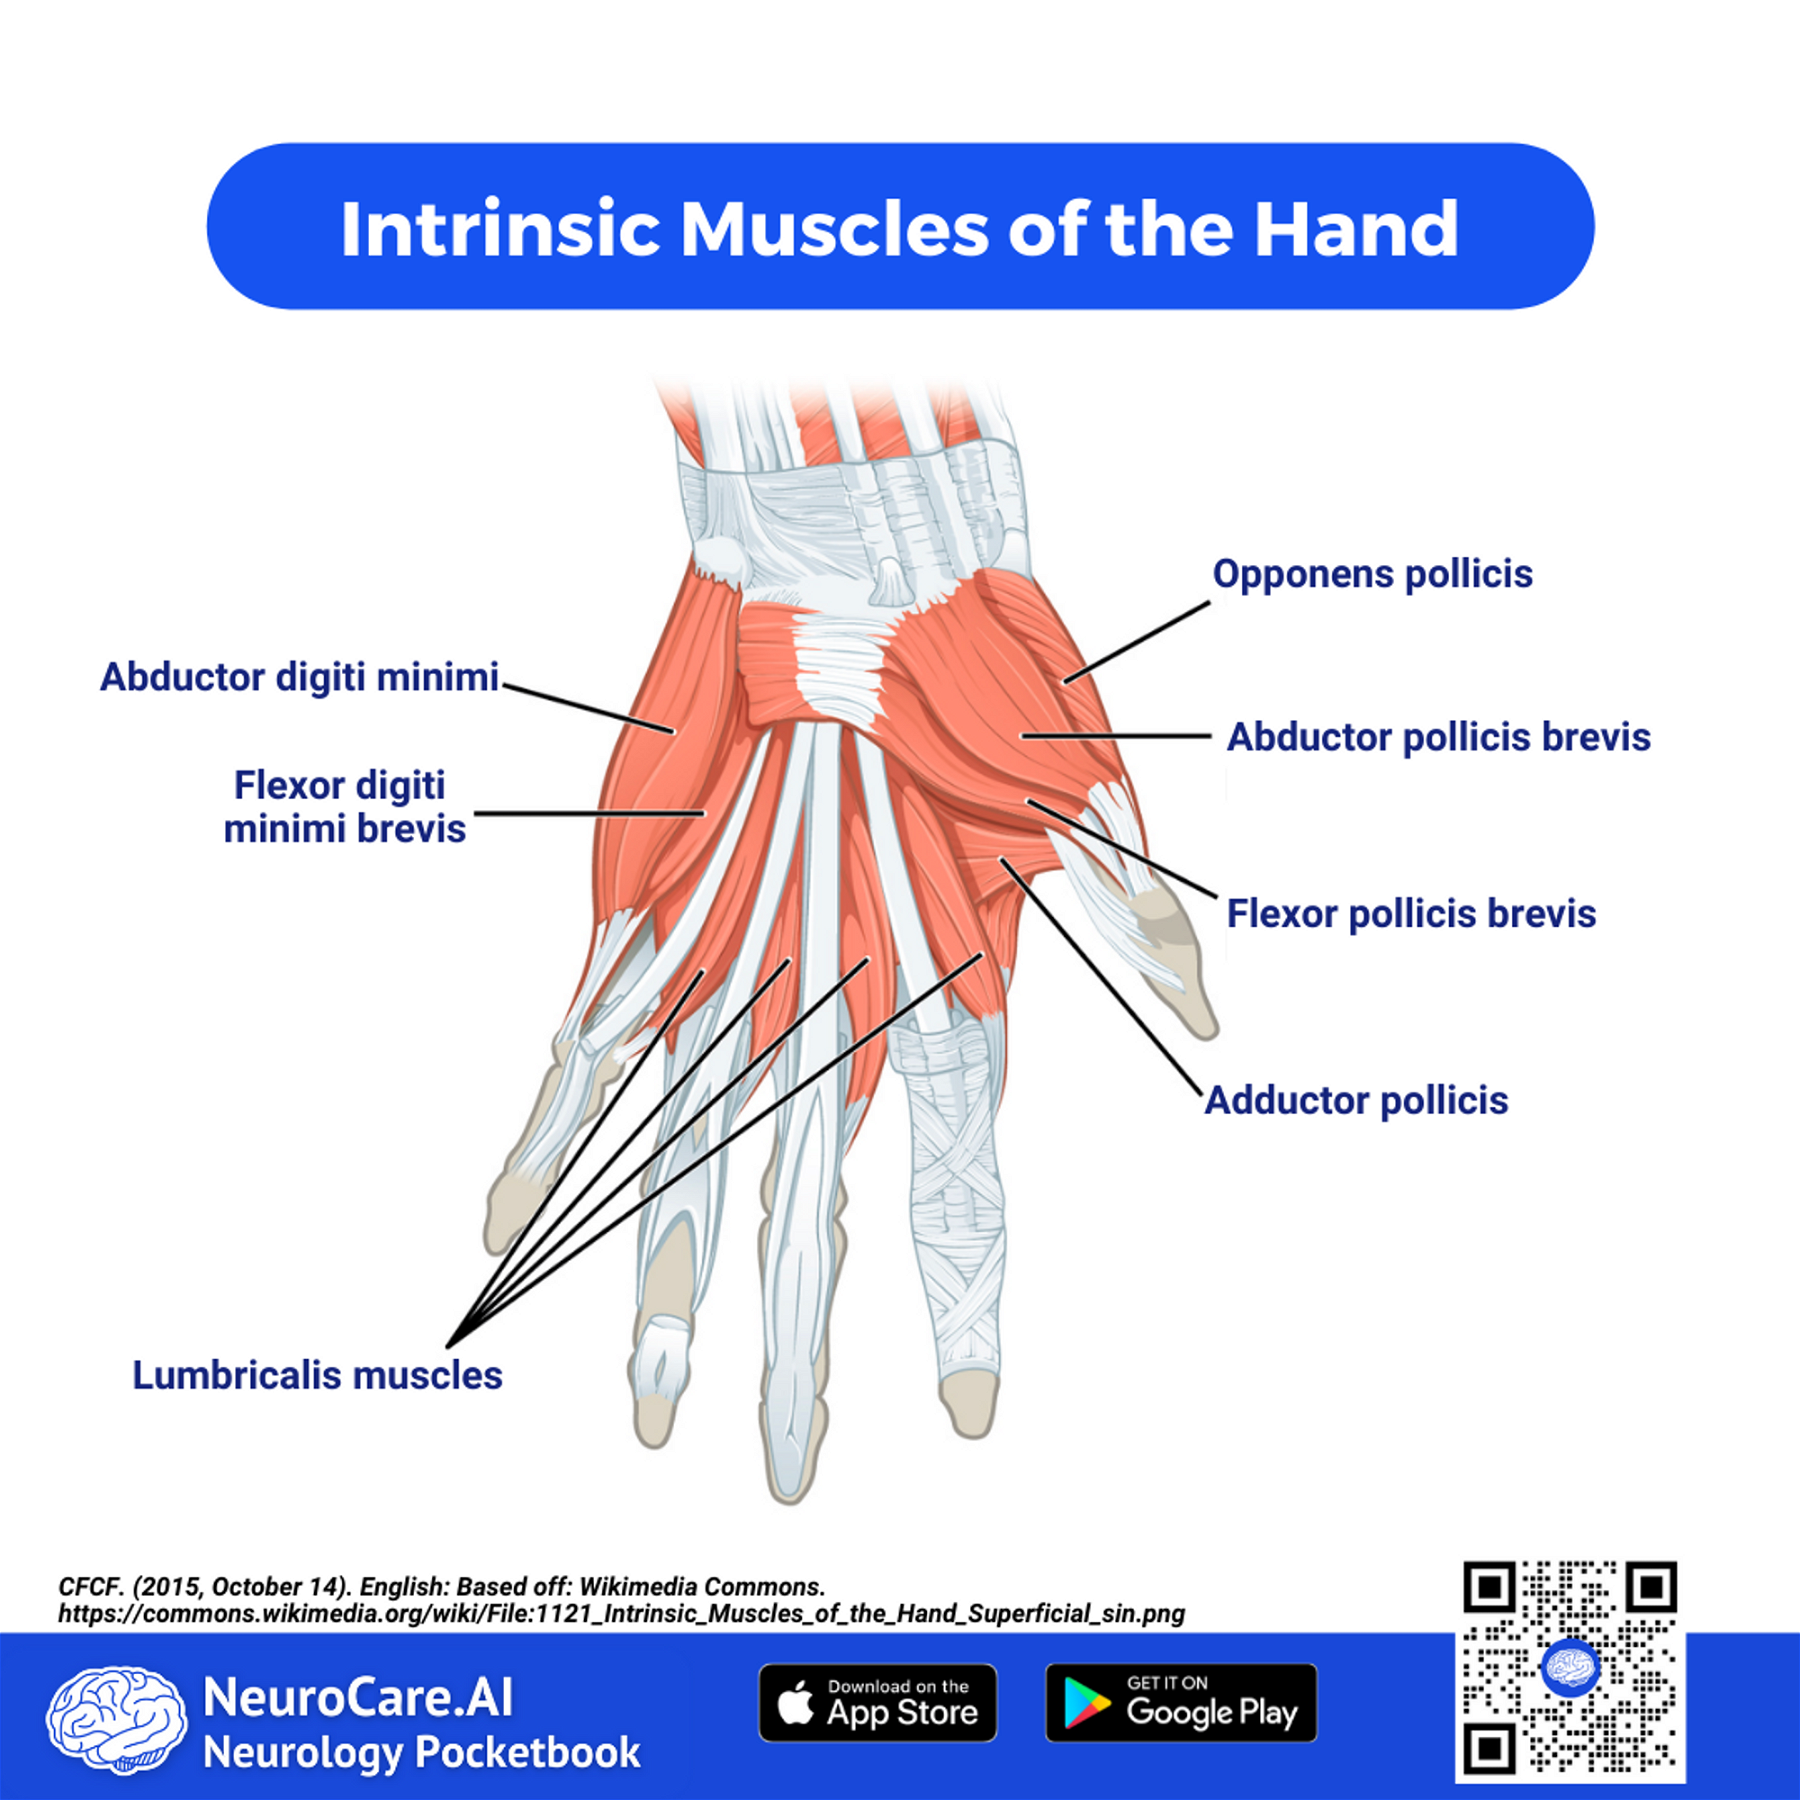 CFCF. (2015, October 14). English: Based off: Wikimedia Commons. https://commons.wikimedia.org/wiki/File:1121_Intrinsic_Muscles_of_the_Hand_Superficial_sin.png ‌